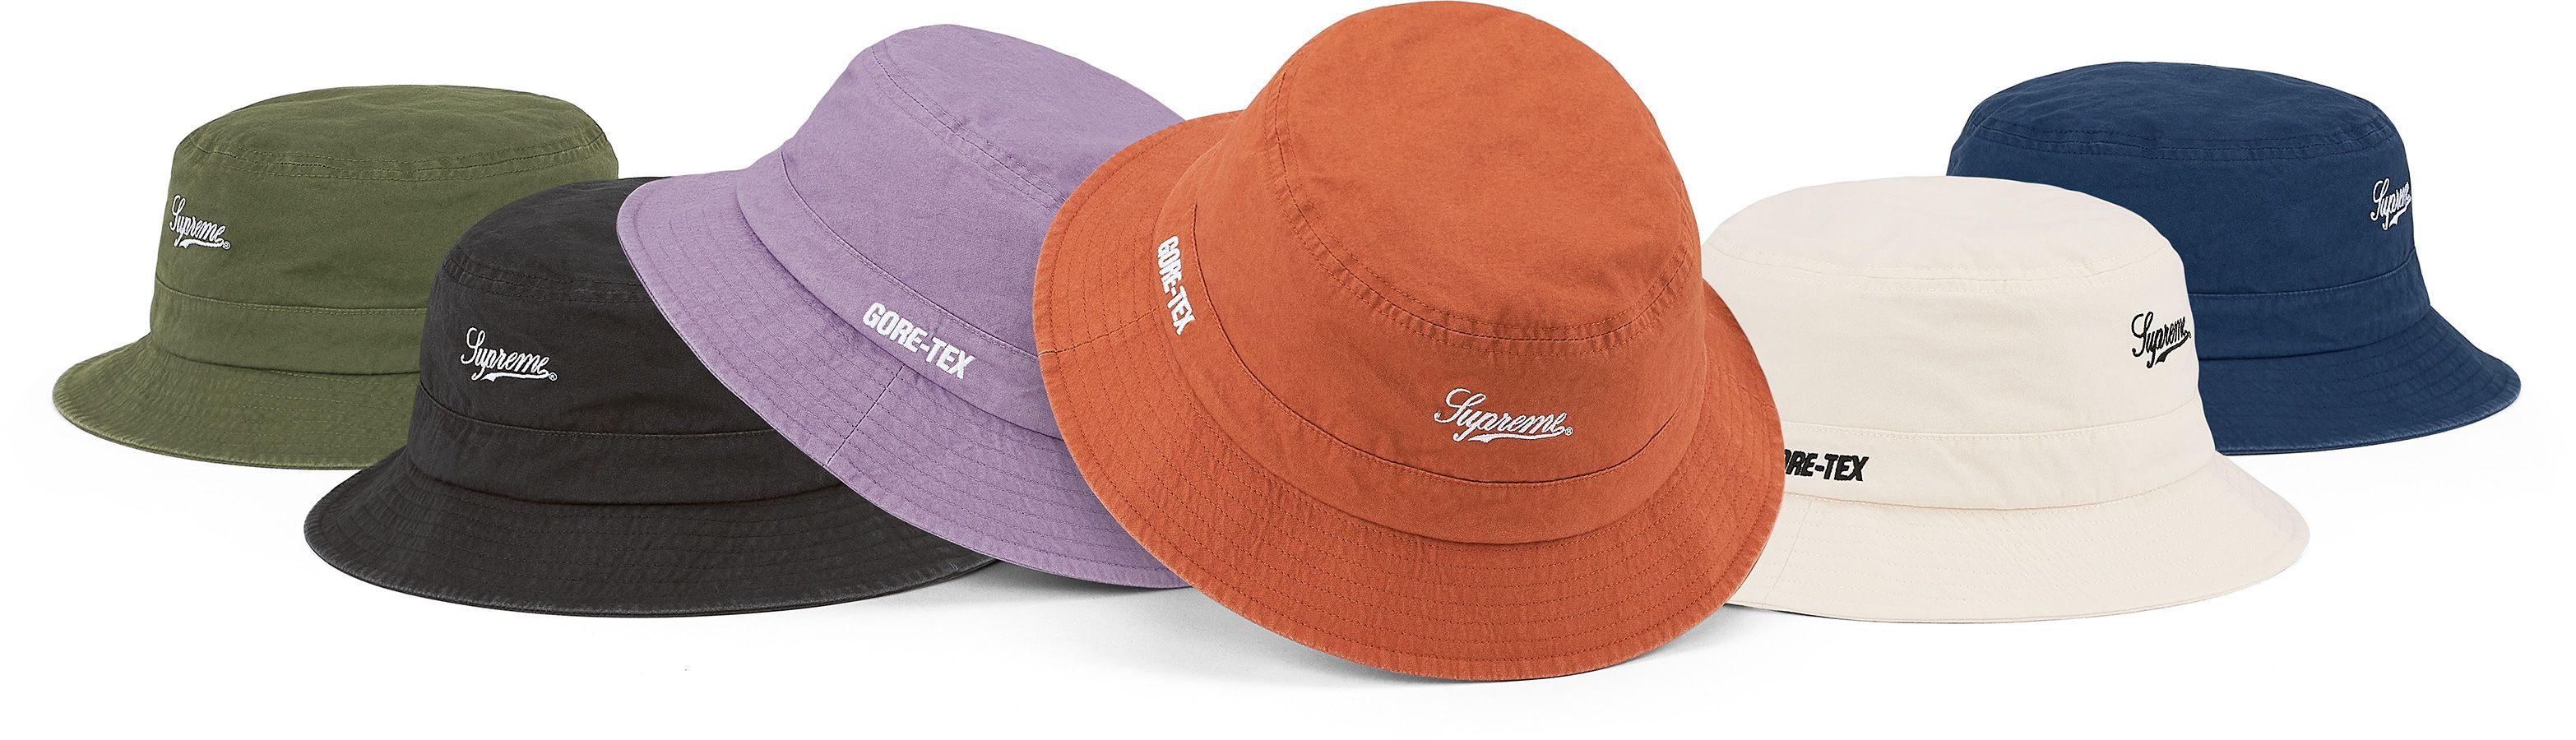 Dry Wax Cotton Camp Cap - Fall/Winter 2020 Preview – Supreme